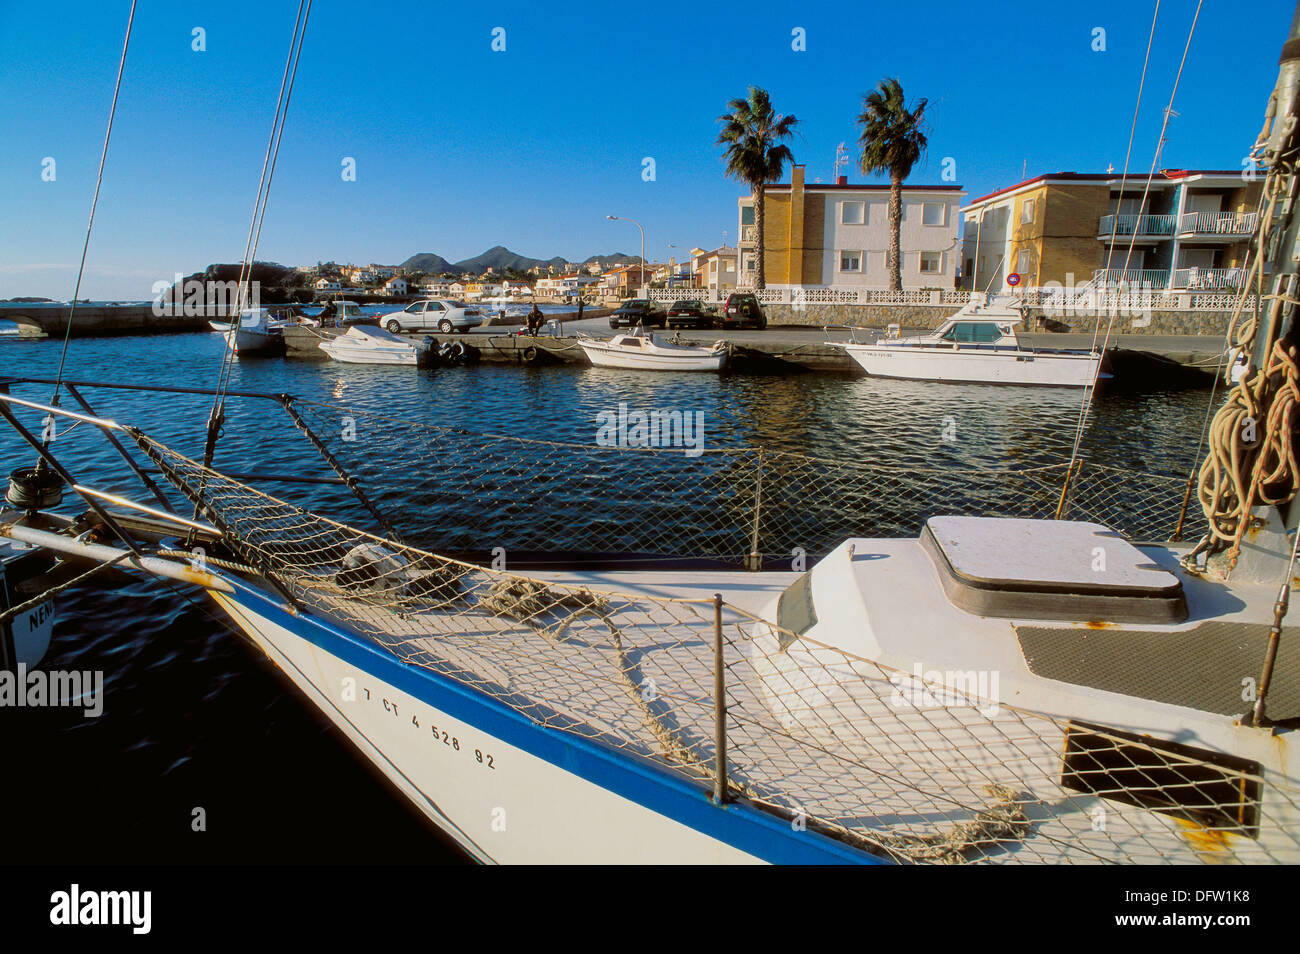 Port Of Palos High Resolution Stock Photography and Images - Alamy